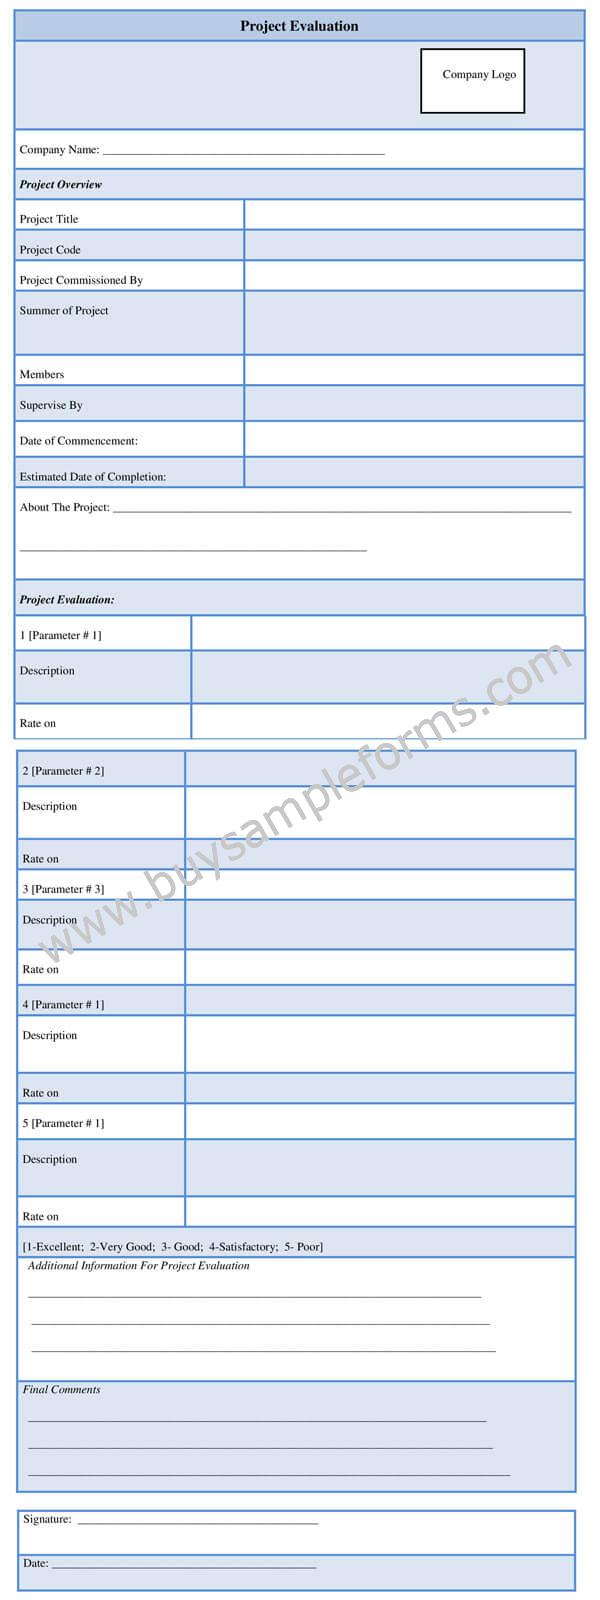 Project Evaluation Form Template Word